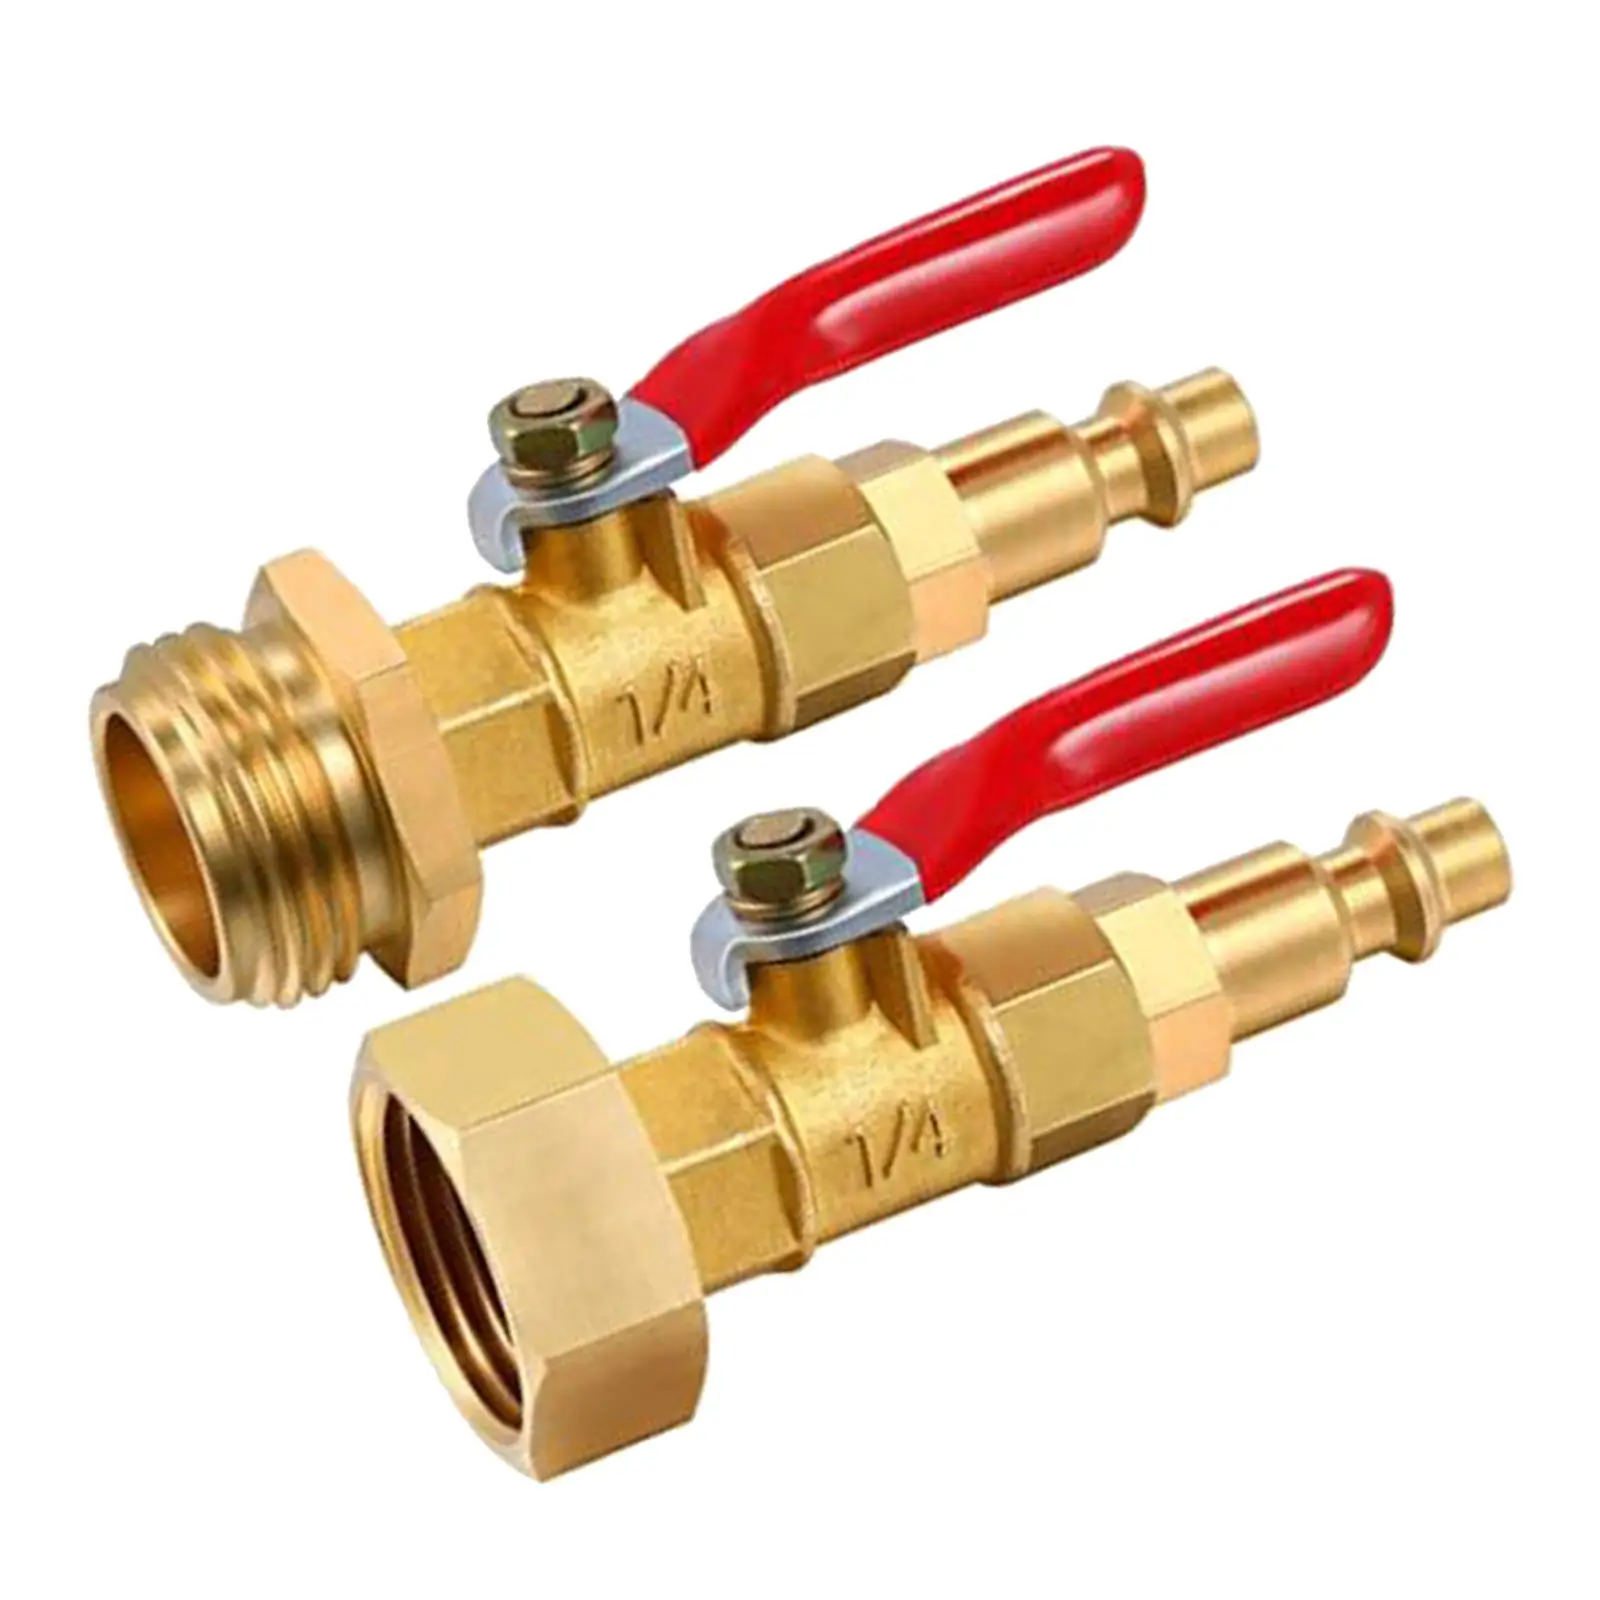 2PCS Brass Winterize Adapter 1/4 Inch Male Quick Connecting Plug & 3/4 inch Male GHT Thread with Ball Valve for RV Boat Trailer